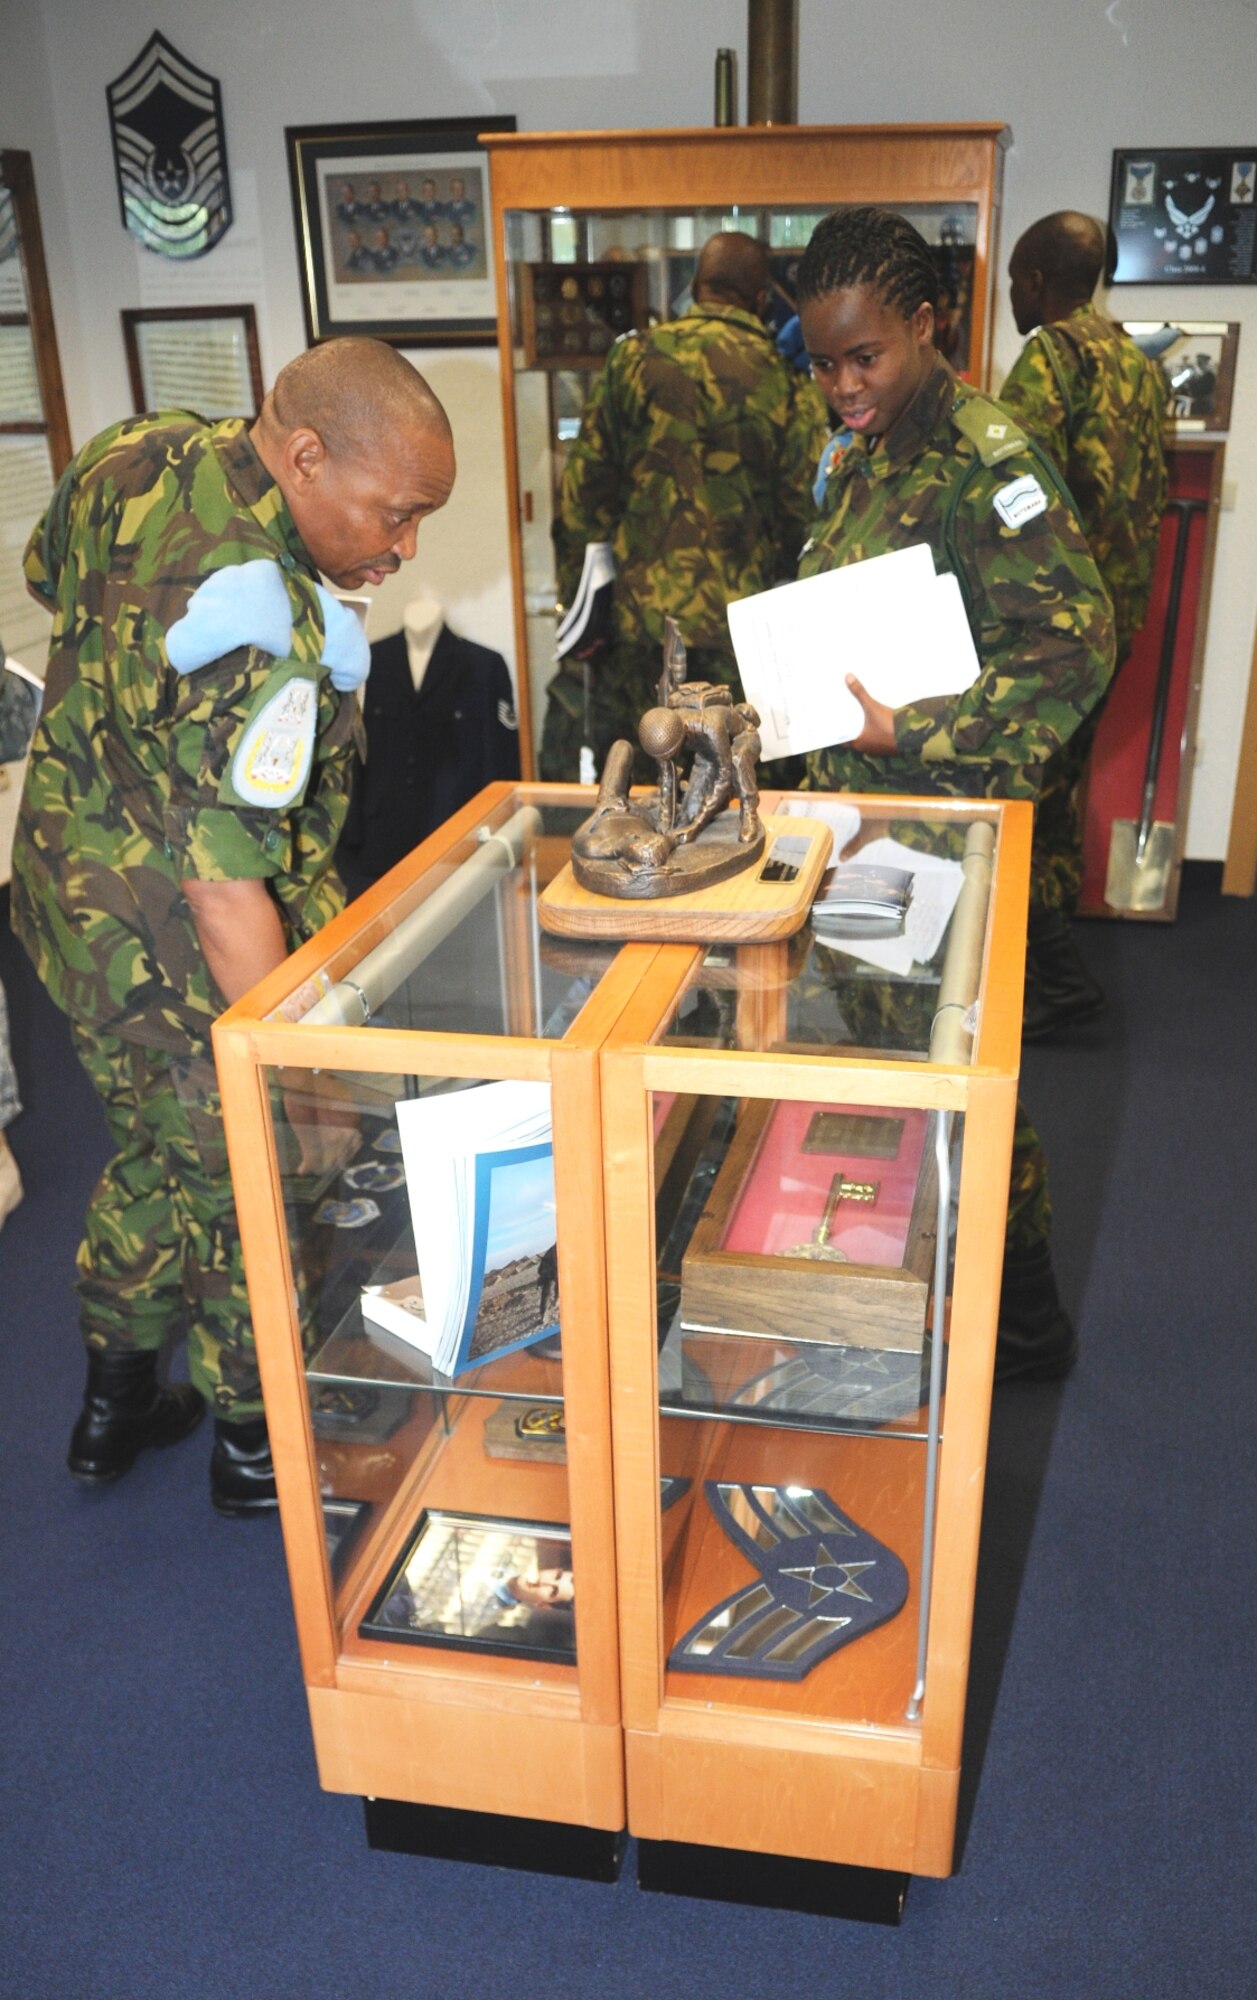 VOGELWEH BASE, Germany -- Botswana Forces Military Command Sergeant Major Mogakolodi Sebego (left) and 2nd. Lt. Lesedi Kelesitse view the enlisted heritage display at the Airman Leadership School here Sept. 22. The Botswana delegation was visiting 17th Air Force at Ramstein on a familiarization engagement from Sept. 21-24, which included a series of orientations, tours and panel discussions focused on development of the enlisted force. The visit also included stops at the USAFE NCO Academy, and the 86th Contingency Response Group, among others. (USAF photo by Master Sgt. Jim Fisher) 